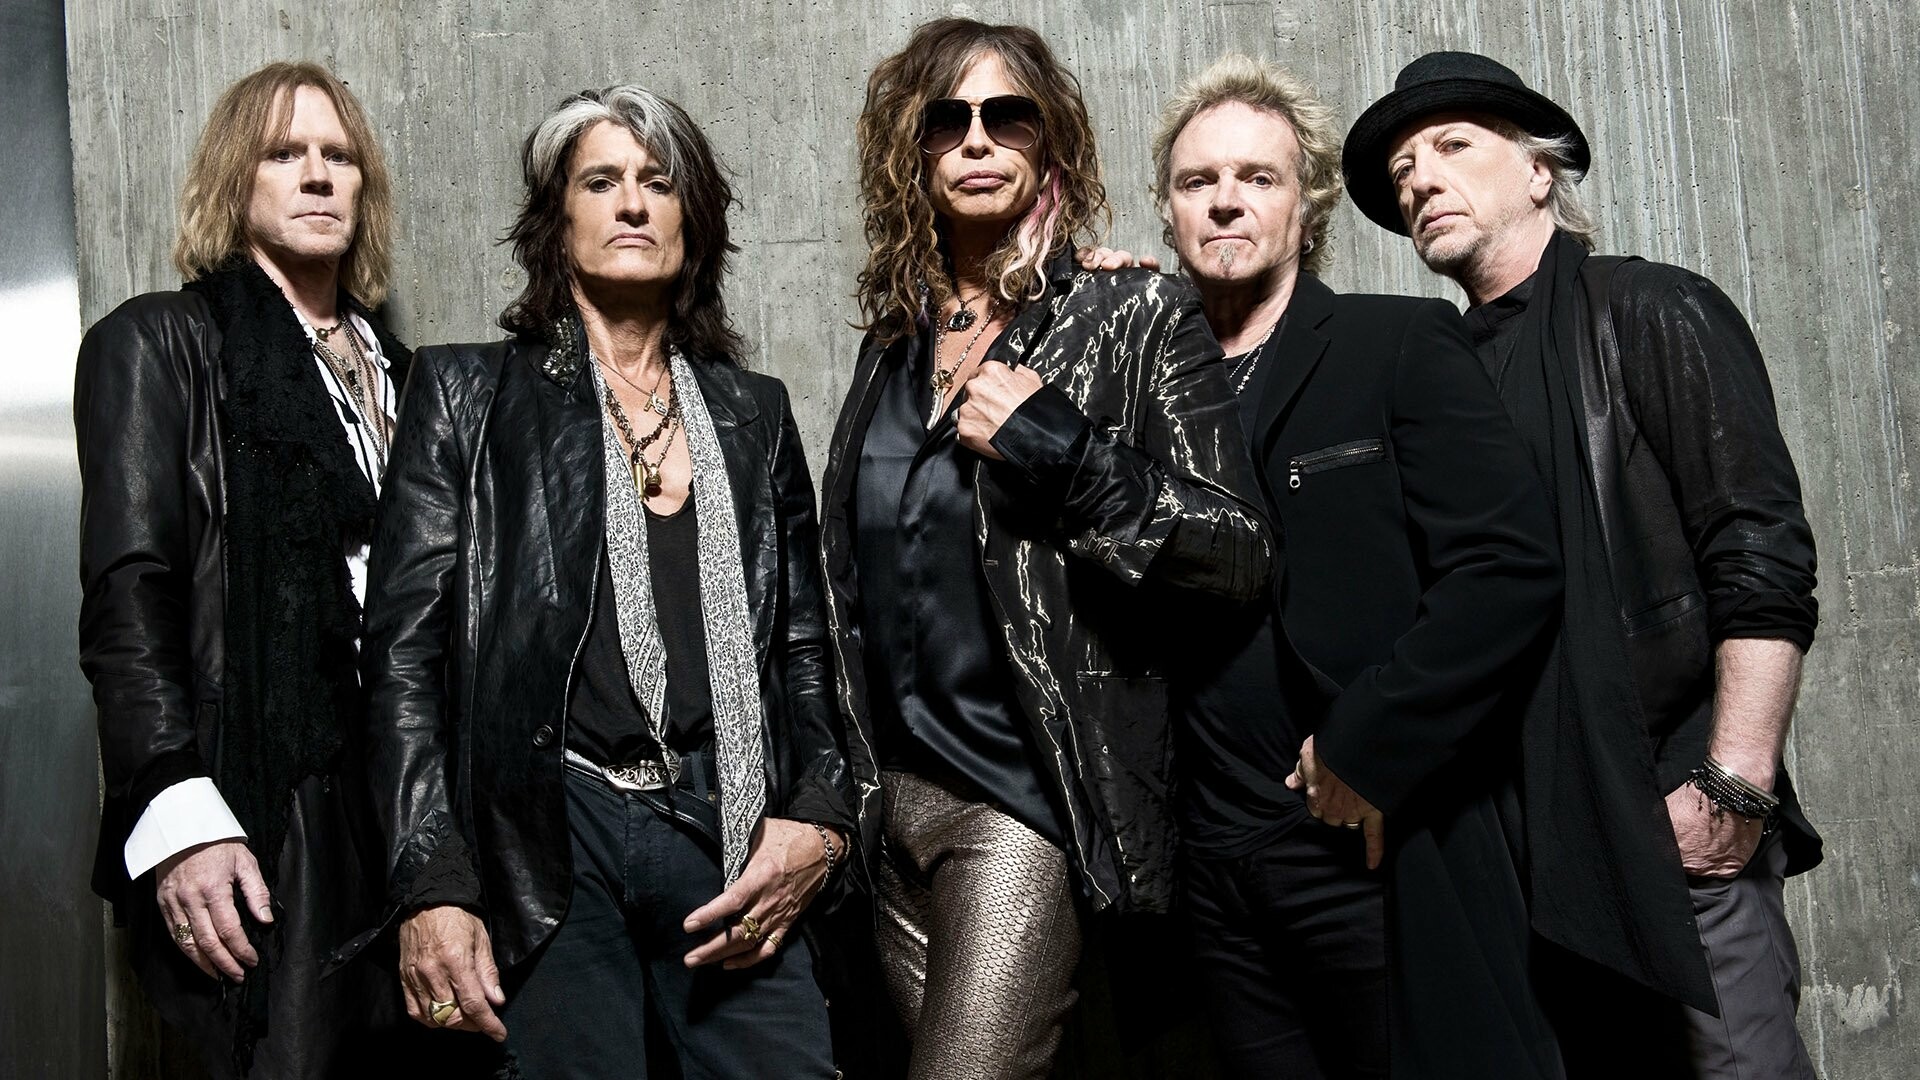 Aerosmith: Get a Grip became the band's first album to reach number one in the United States, Steven Tyler. 1920x1080 Full HD Background.